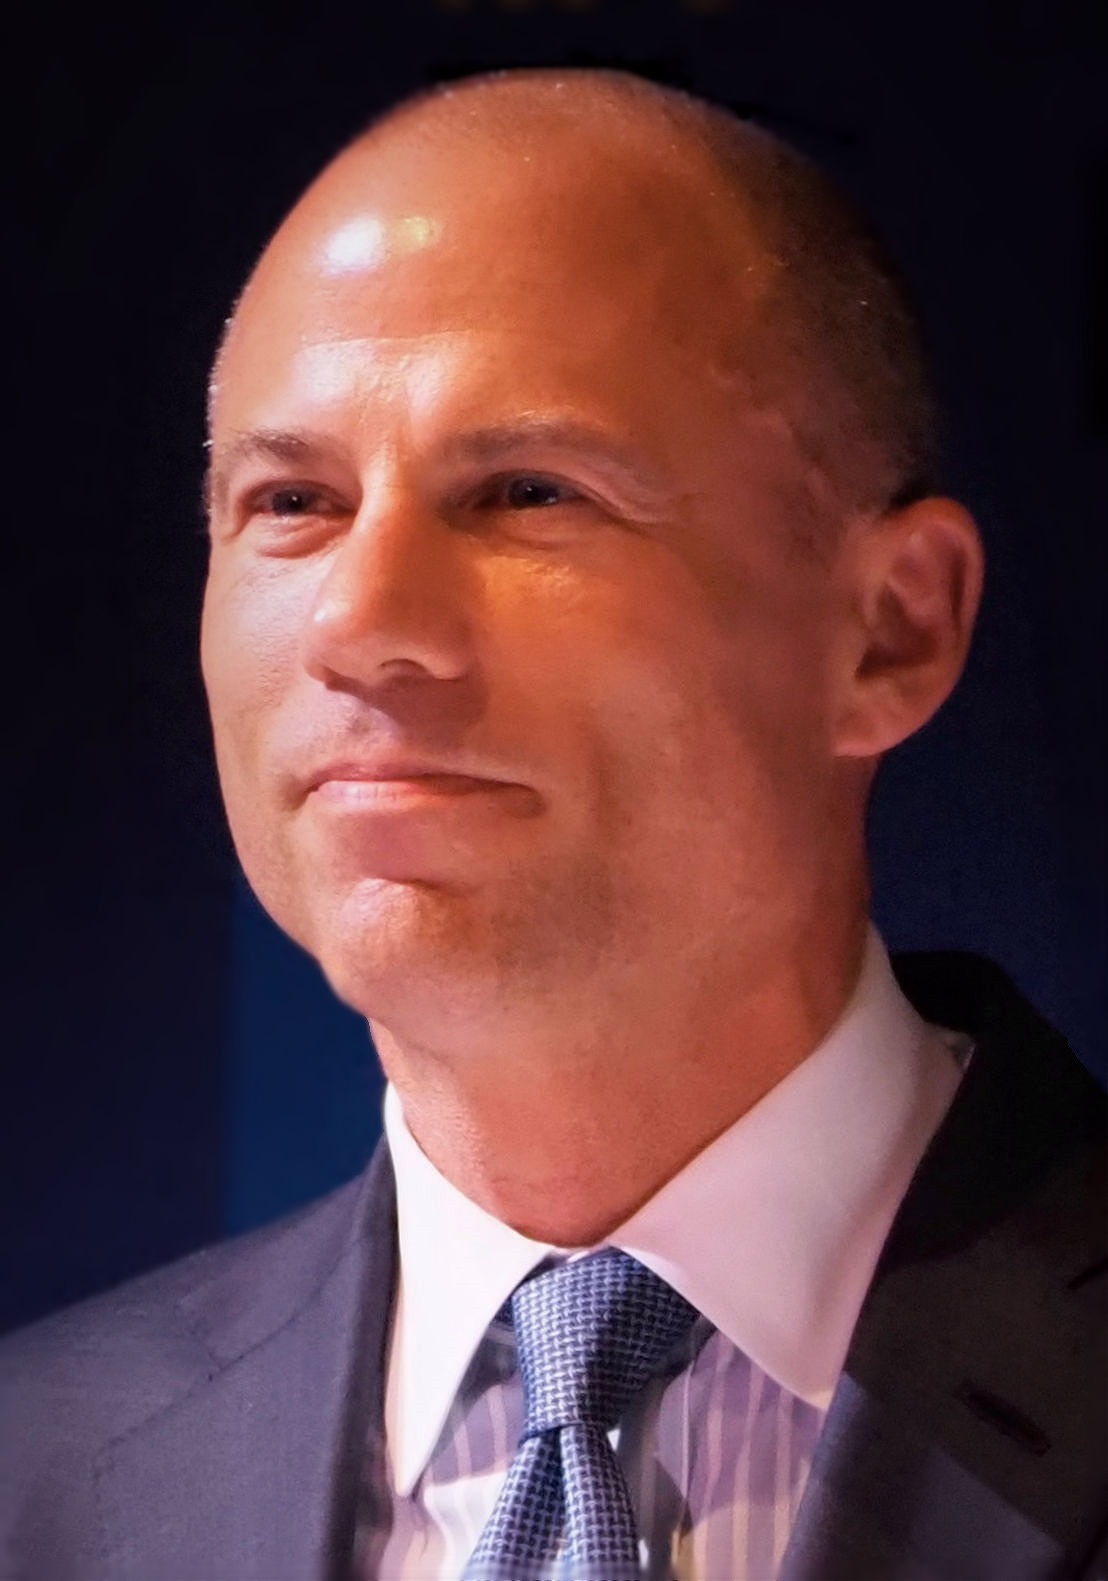 Judge excludes Trump critic Avenatti's financial strains from Nike extortion trial